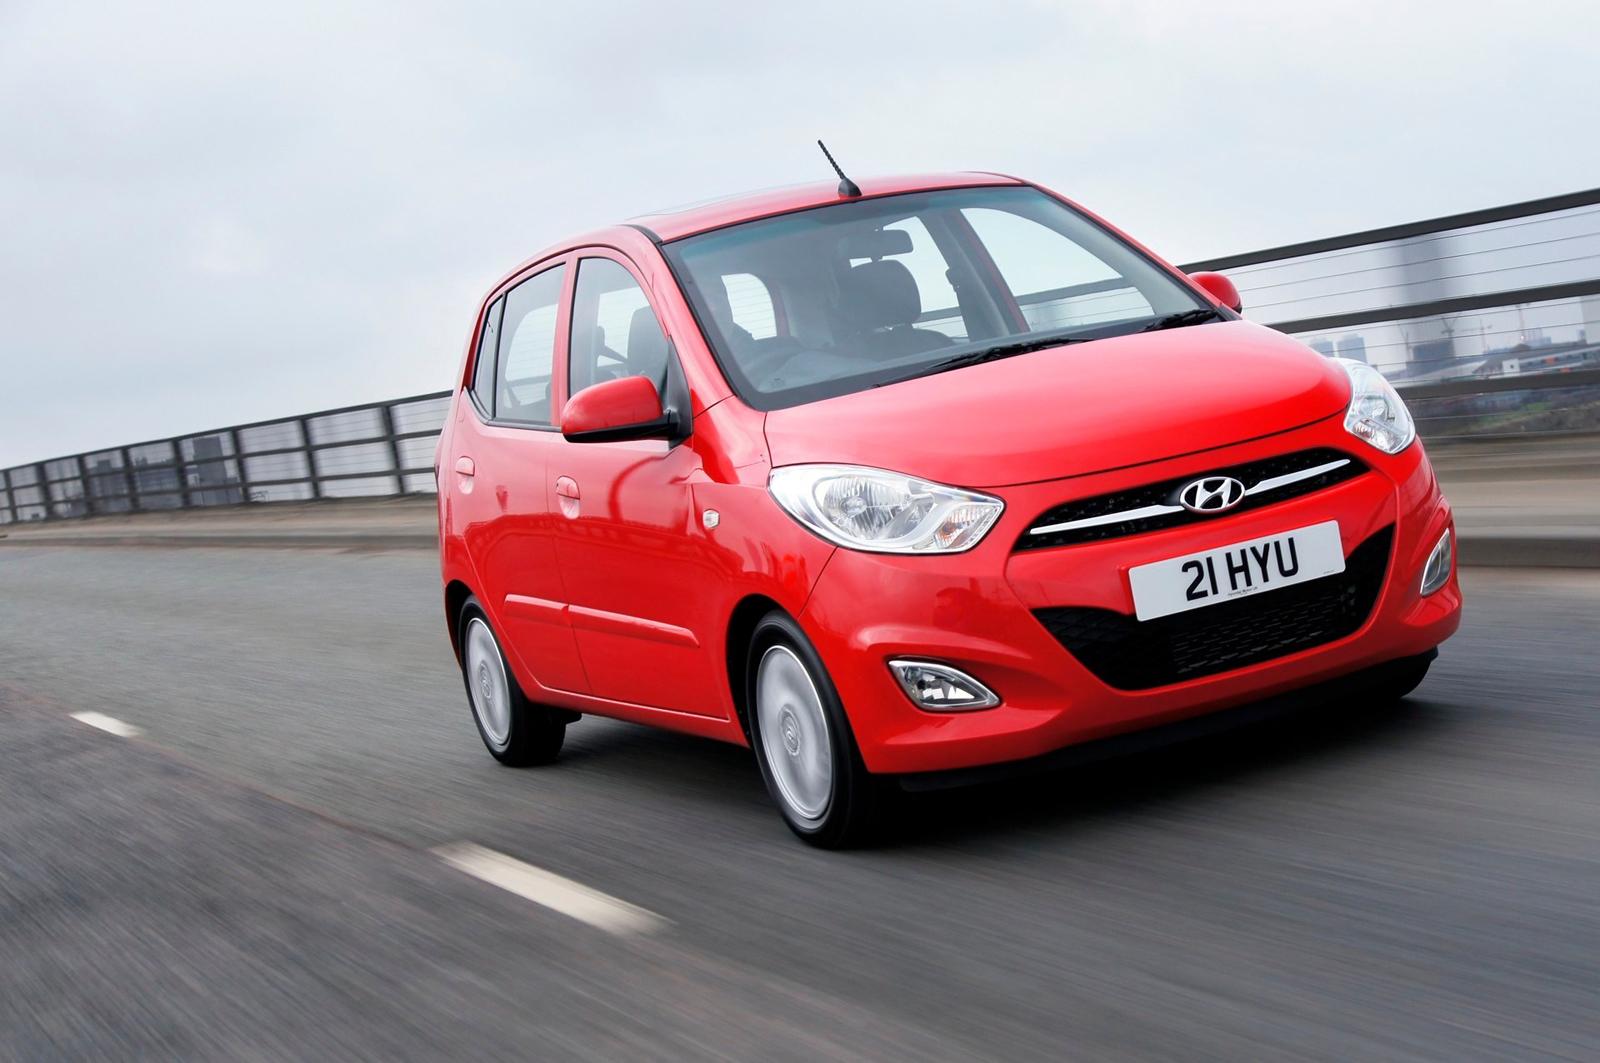 Hyundai i10 facelift 2011 photo 65899 pictures at high resolution